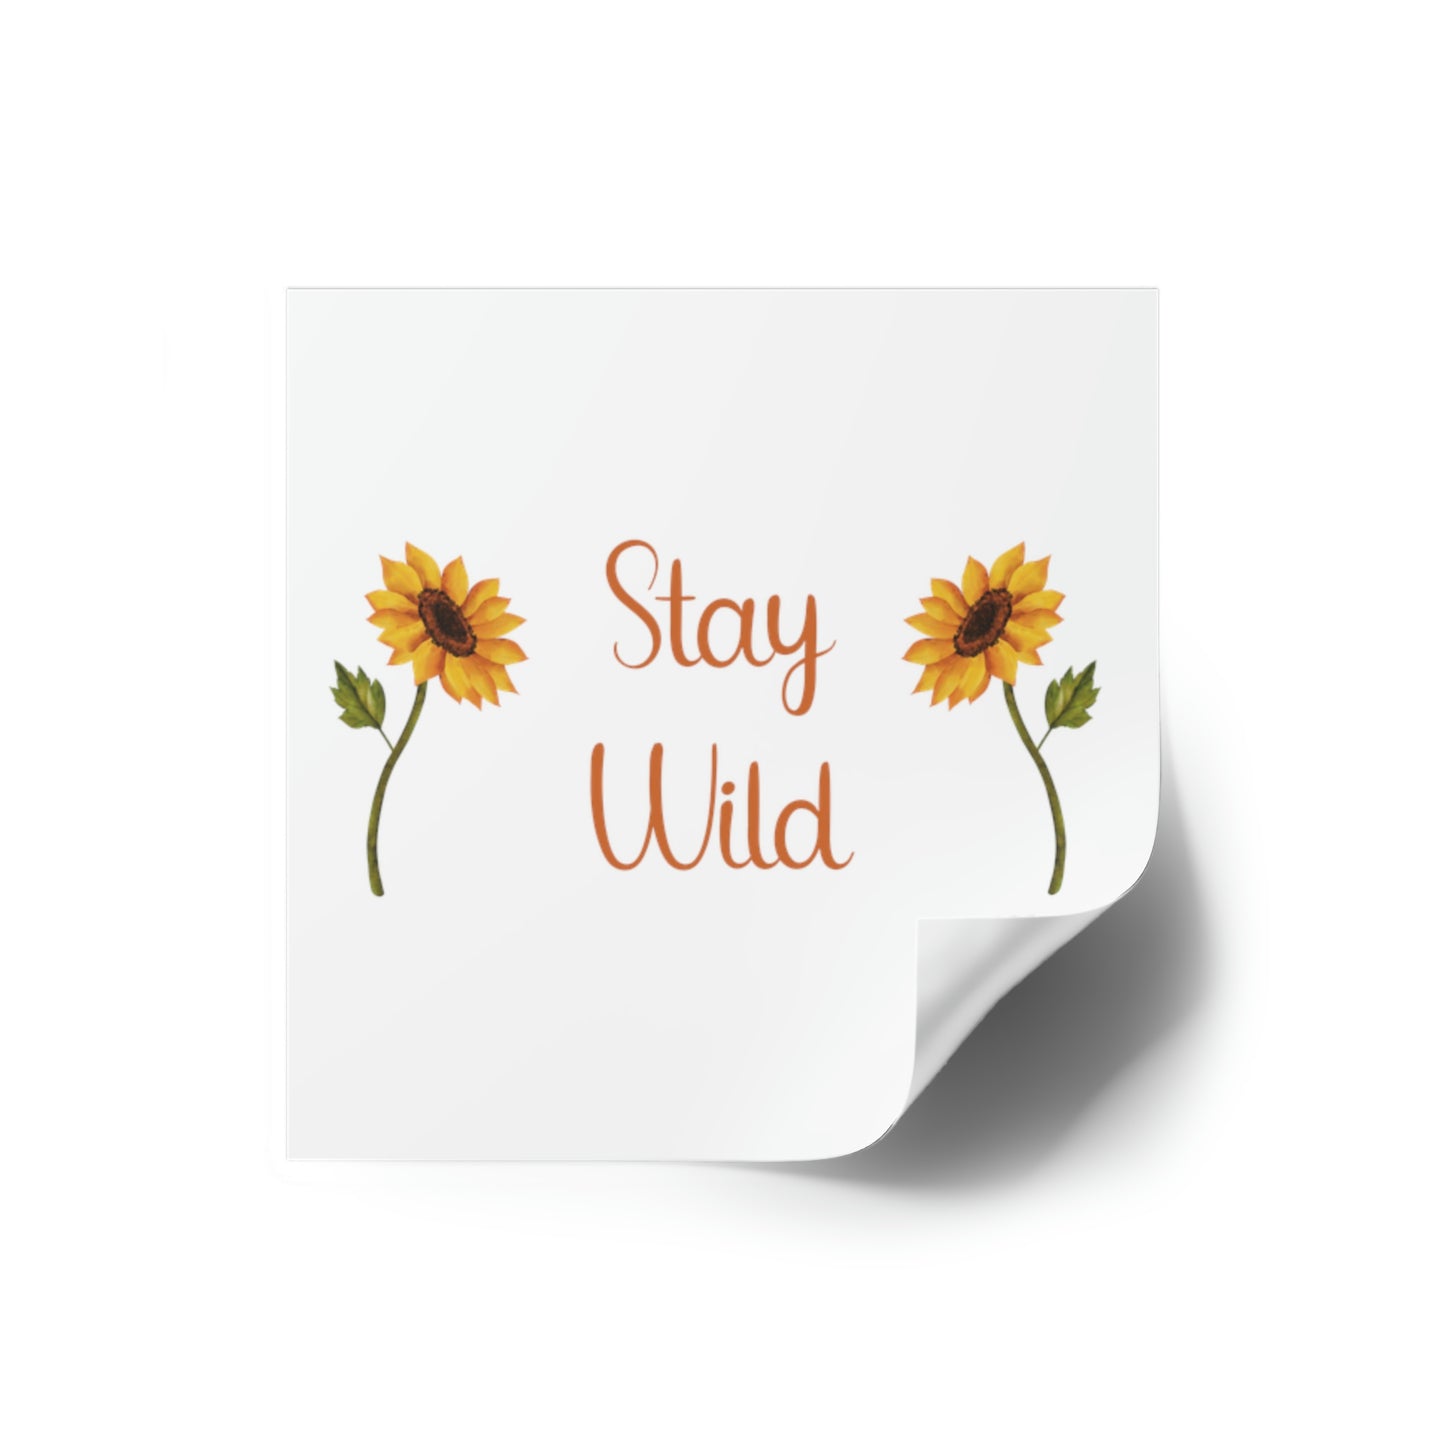 Stay Wild Square Stickers, Indoor\Outdoor